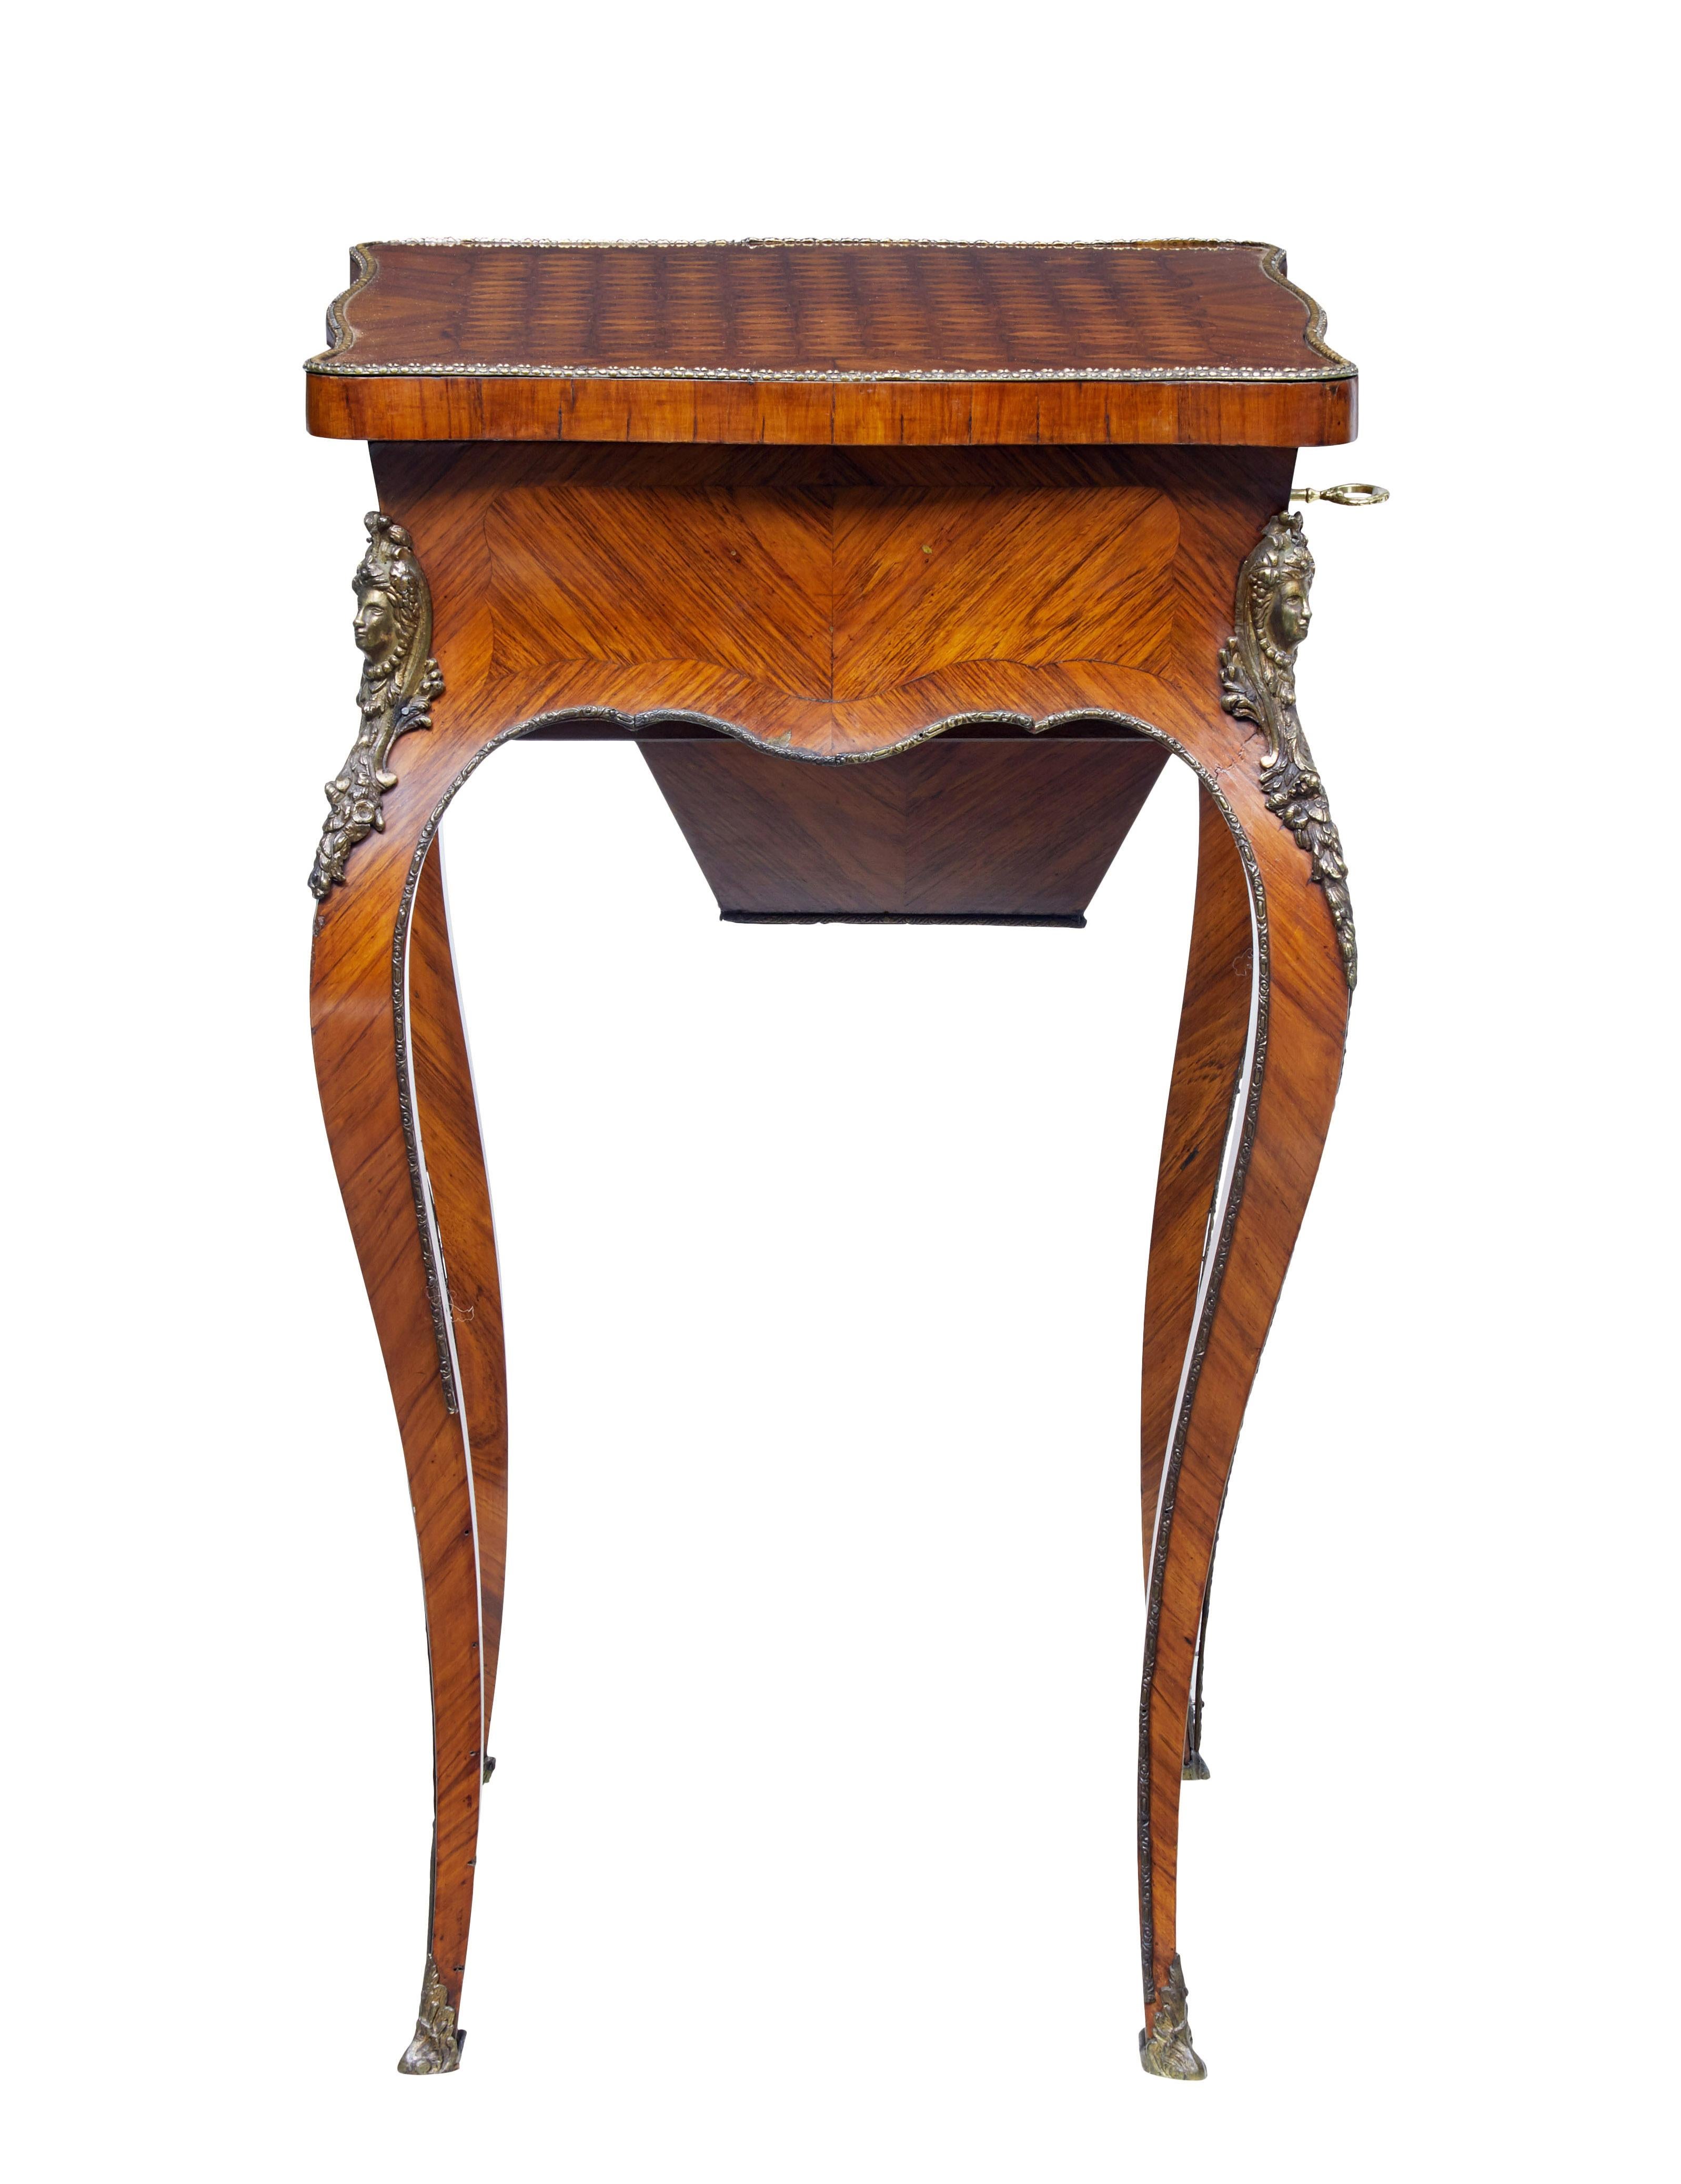 Hand-Carved 19th century French kingwood sewing work table For Sale